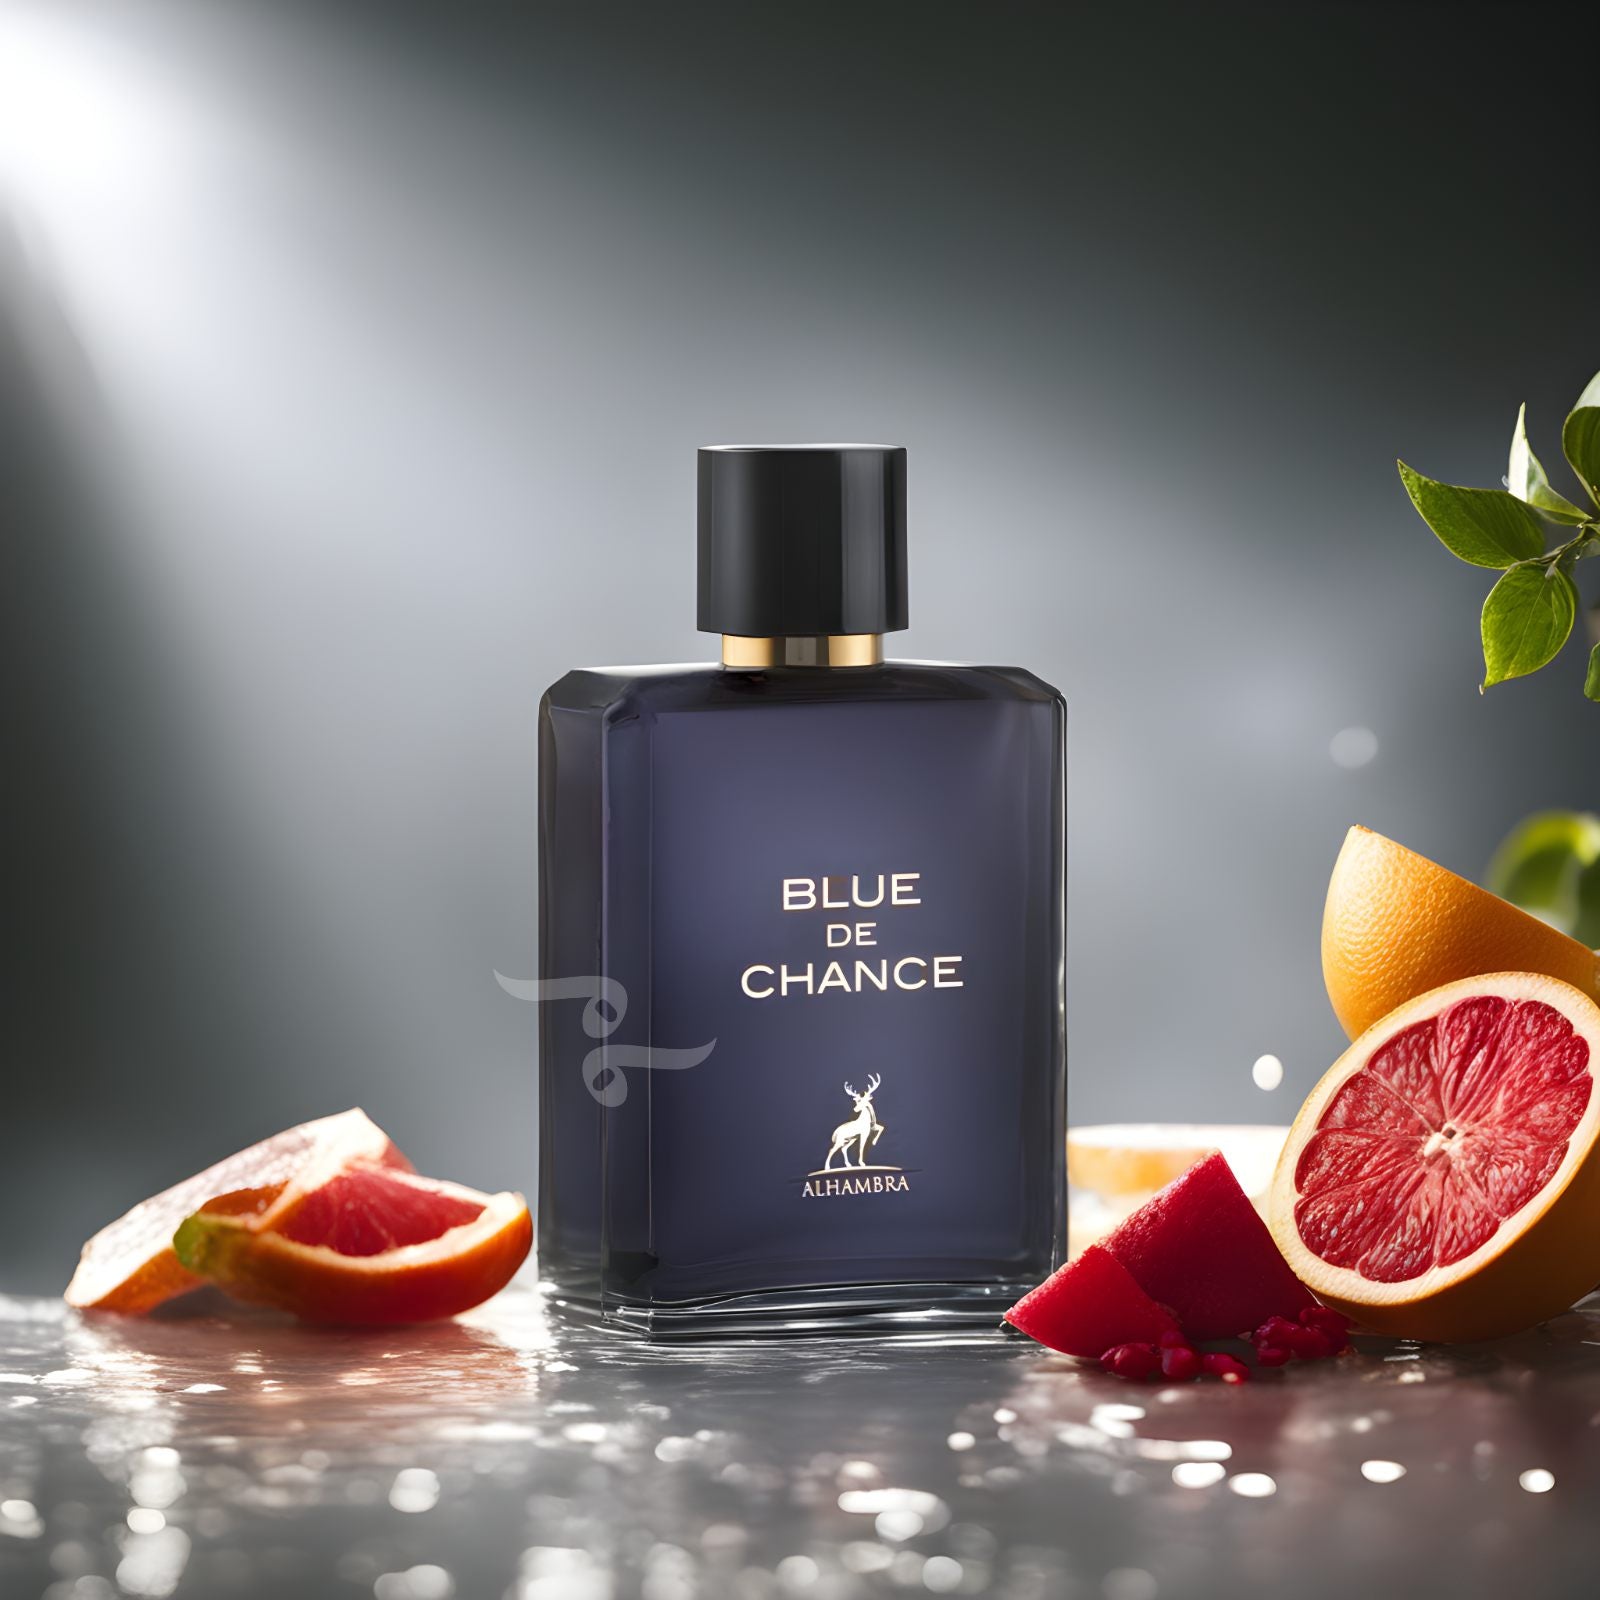 Tobacco Touch Maison Alhambra perfume - a fragrance for women and men